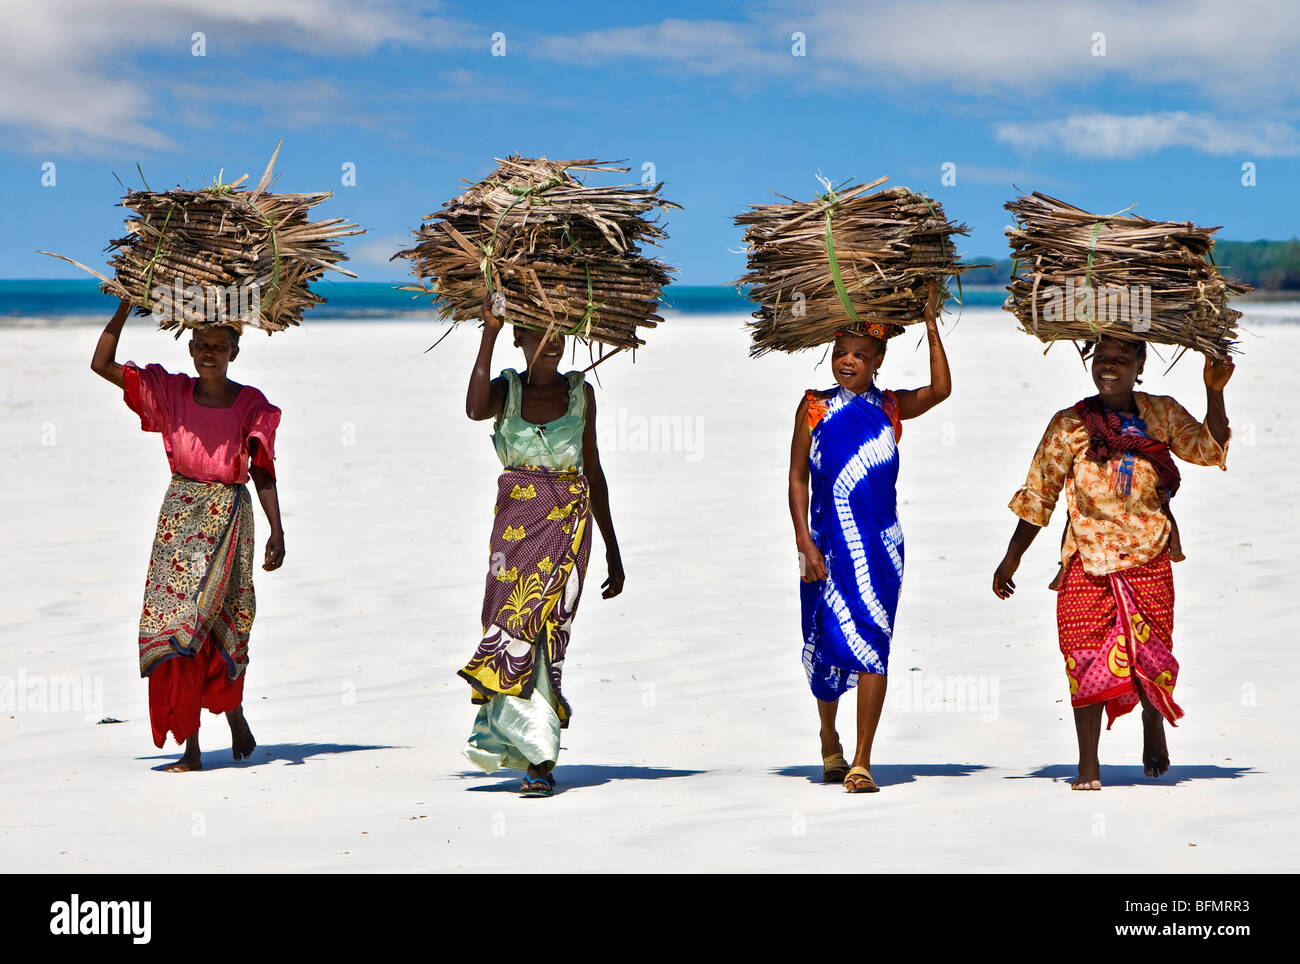 Kenya Mombasa. Women carry on their heads makuti (dried coconut palm fronds used as roofing material) on Kenya s south coast. Stock Photo